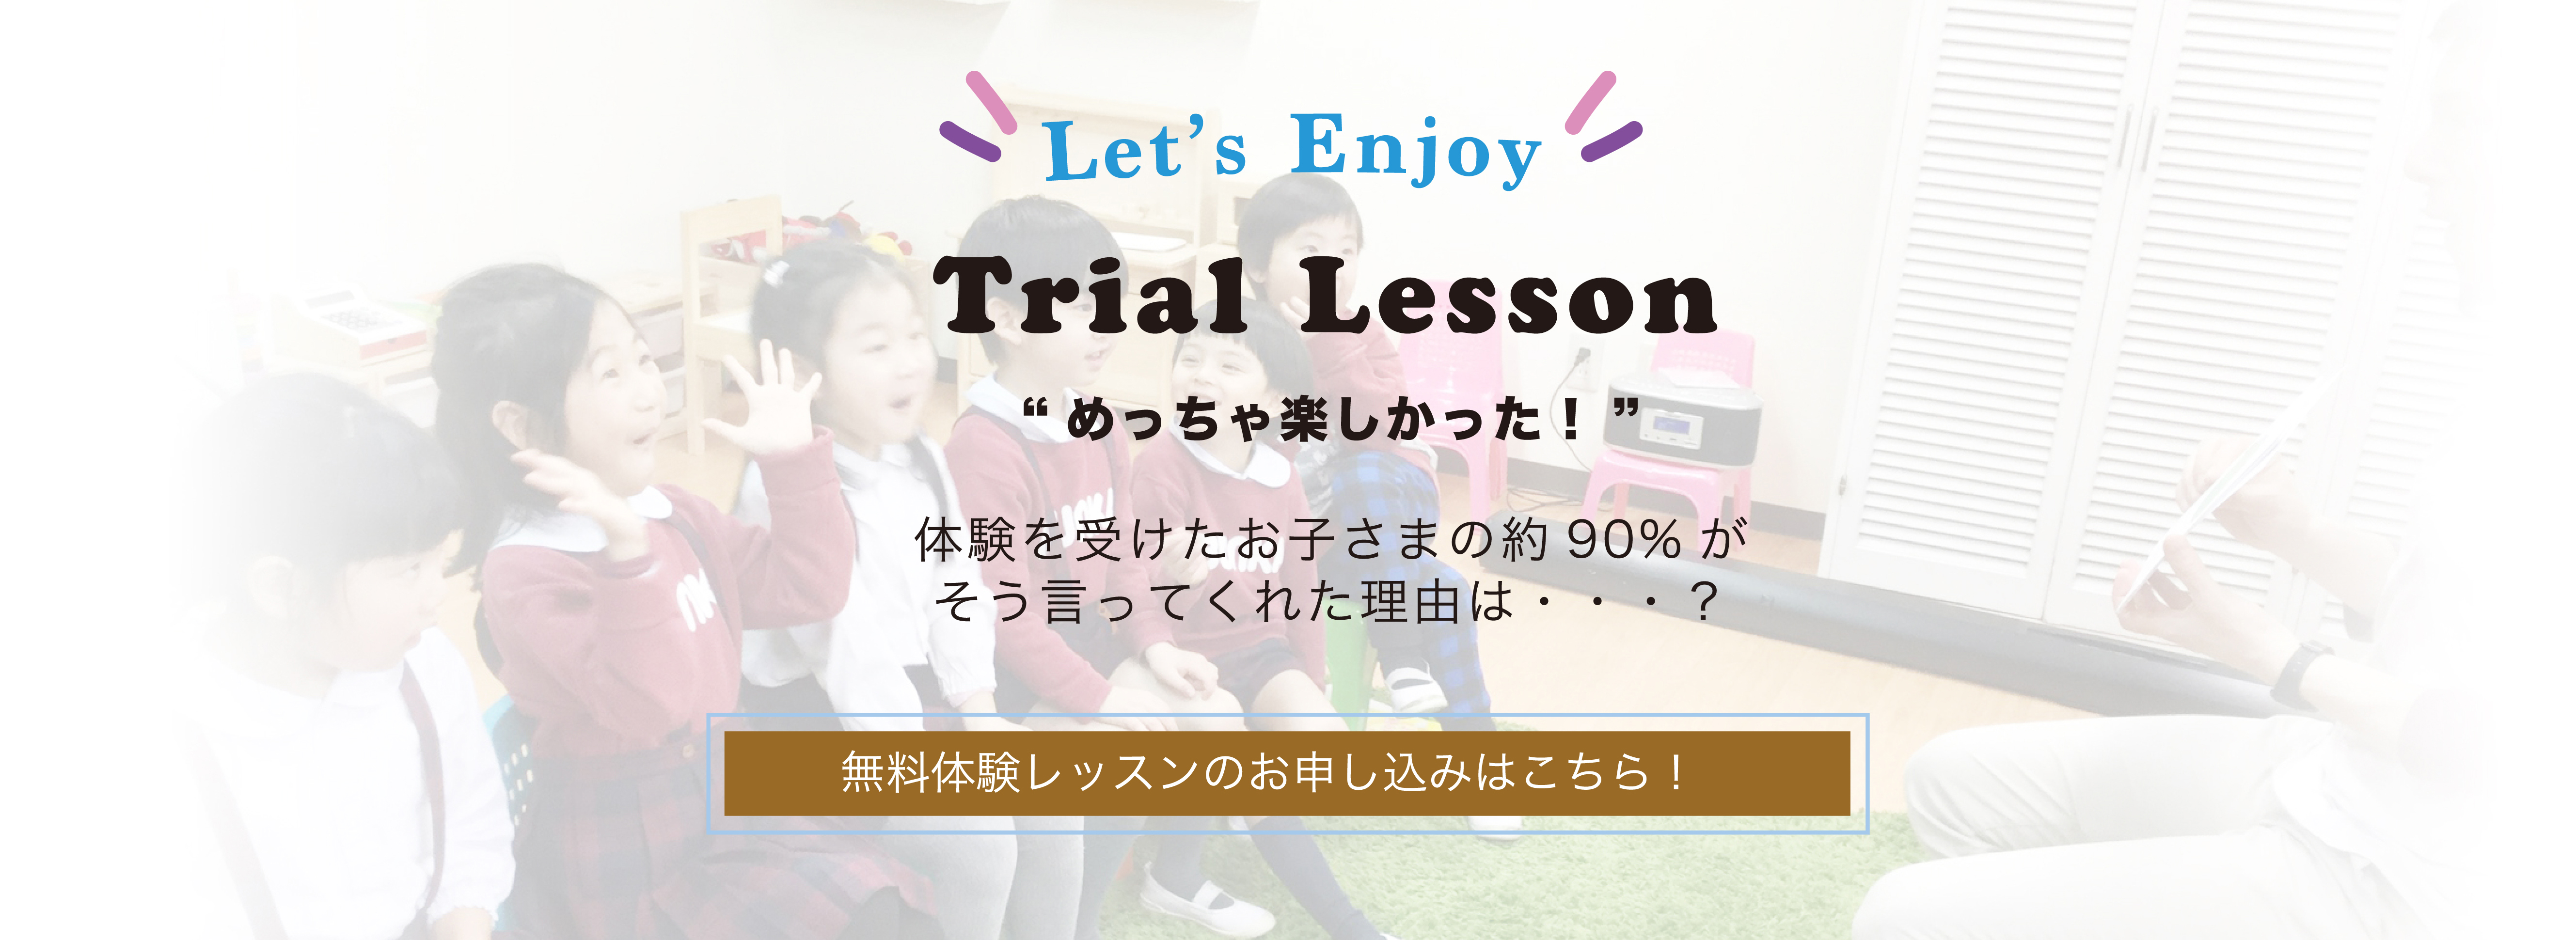 Trial Information